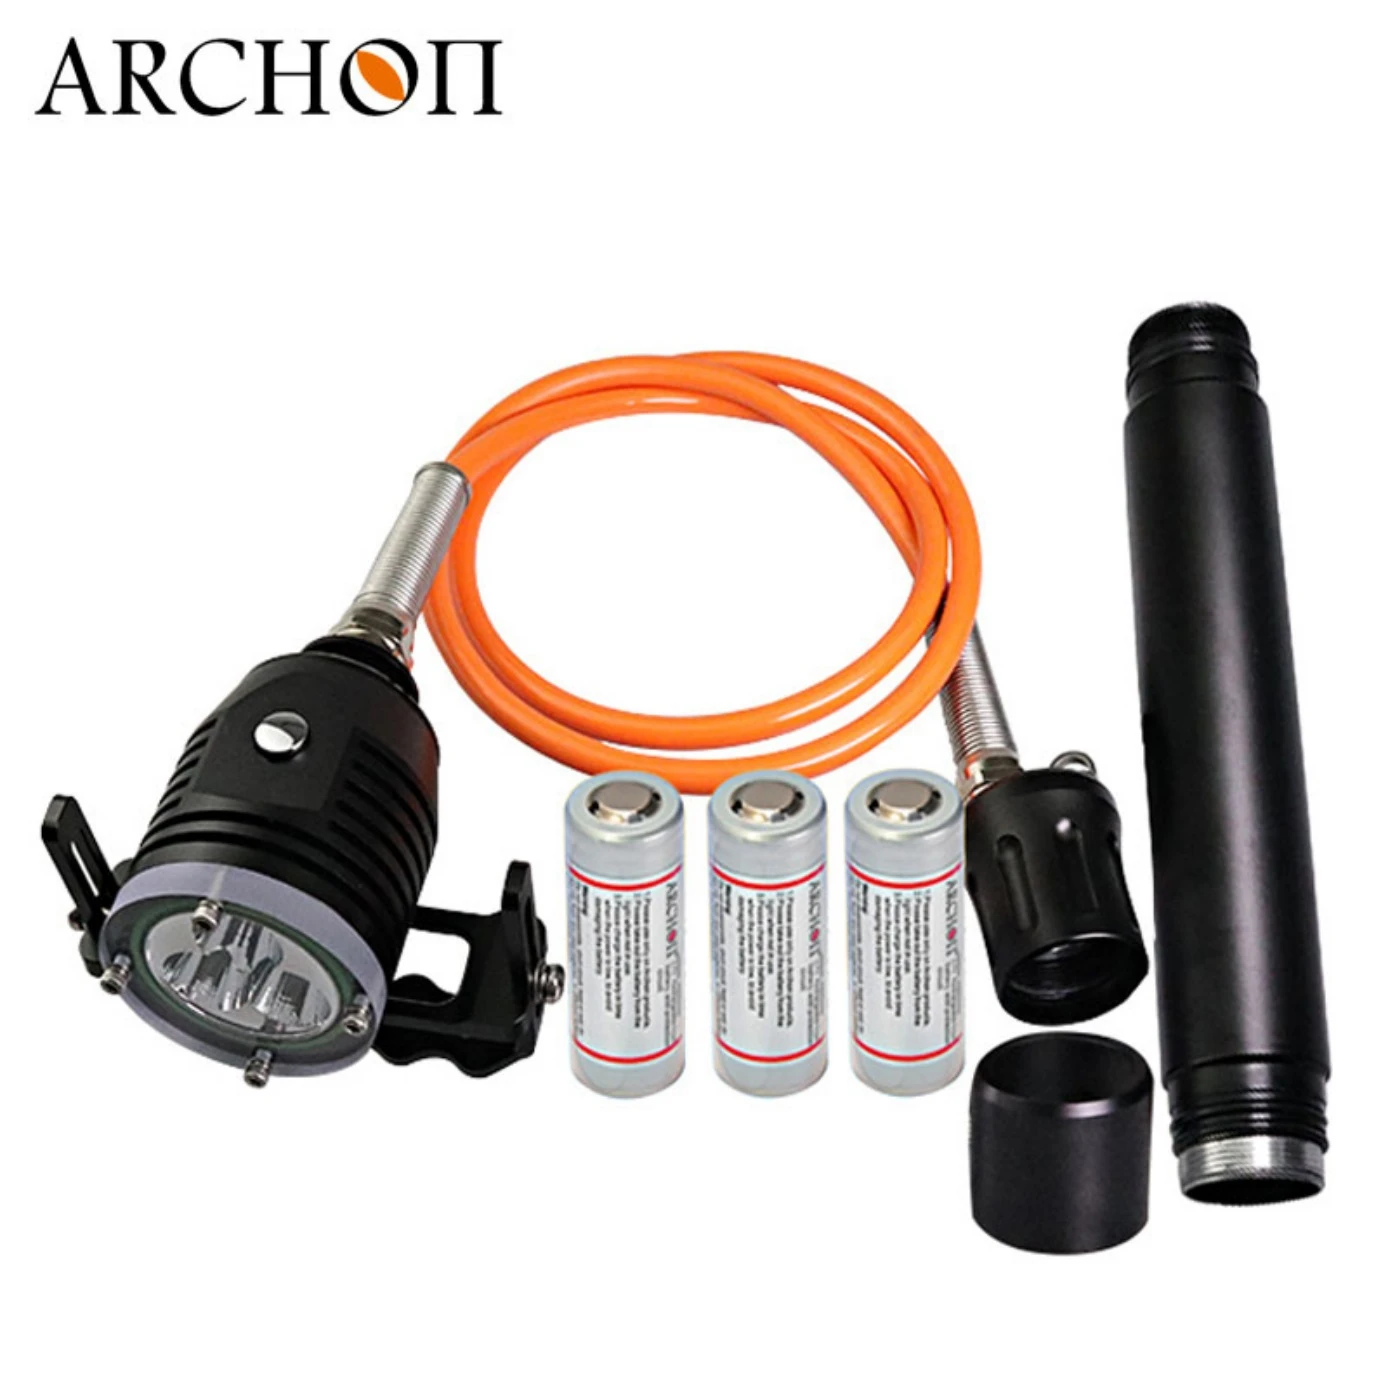 To construct Isaac A central tool that plays an important role ARCHON DH30 II Dive Light Led Underwater CREE XM L U2 3600LM Diving  Flashlight Headlamps by 26650 Battery|LED Flashlights| - AliExpress